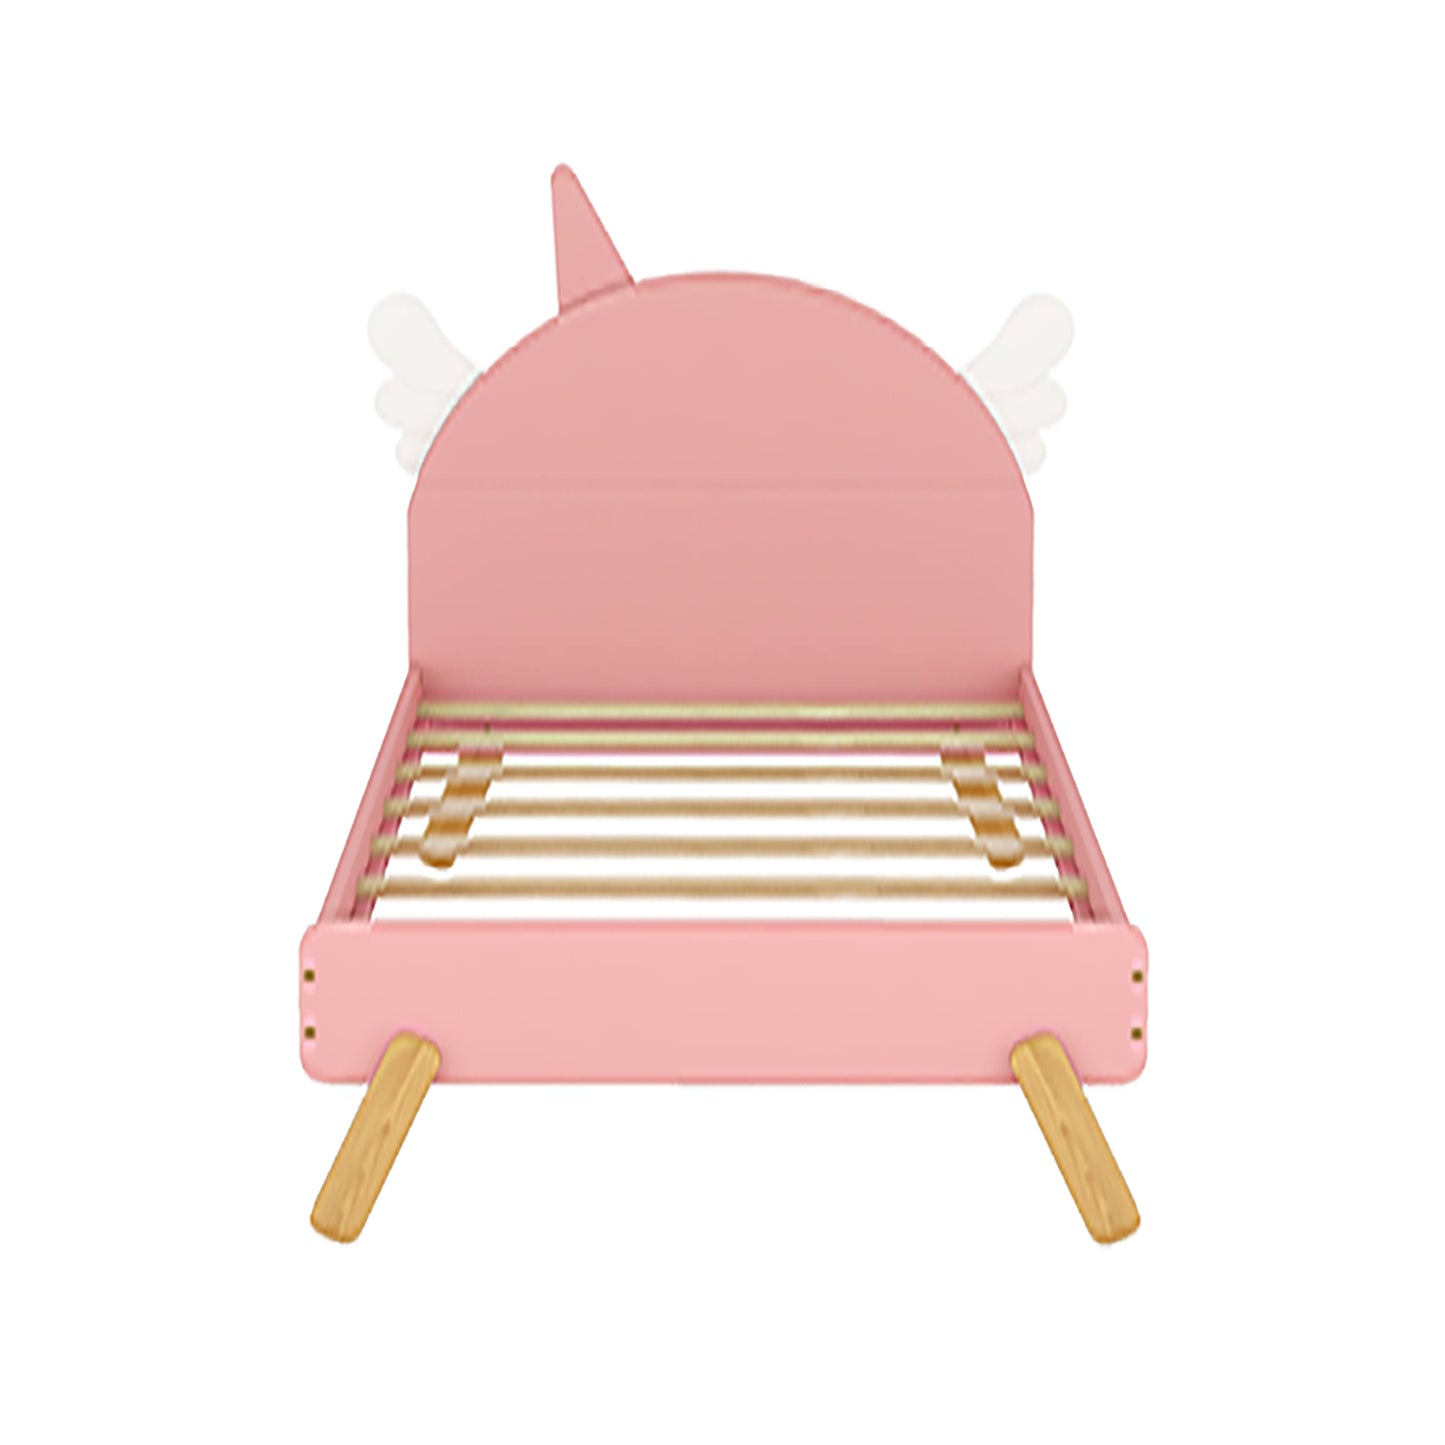 Wooden Cute Bed With Unicorn Shape Headboard,Twin Size Platform Bed,Pink